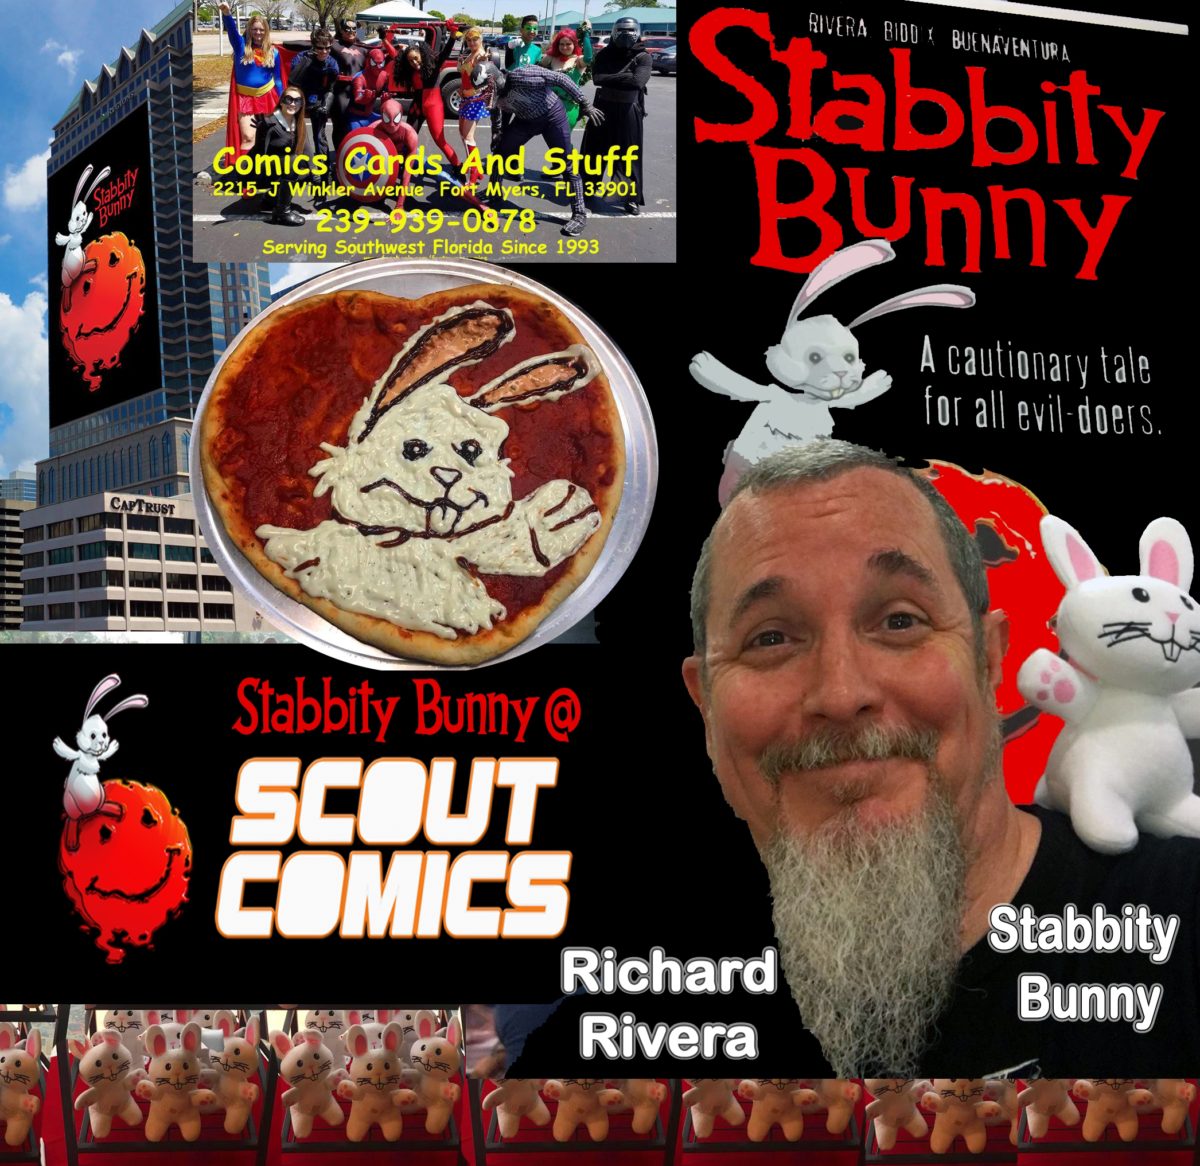 COMIC CON HIGHWAY FLORIDA EXIT:: Fort Myers: Stabbity Bunny,  Richard Rivera and  James Haick will be at Comics Cards And Stuff  for FREE COMIC BOOK DAY